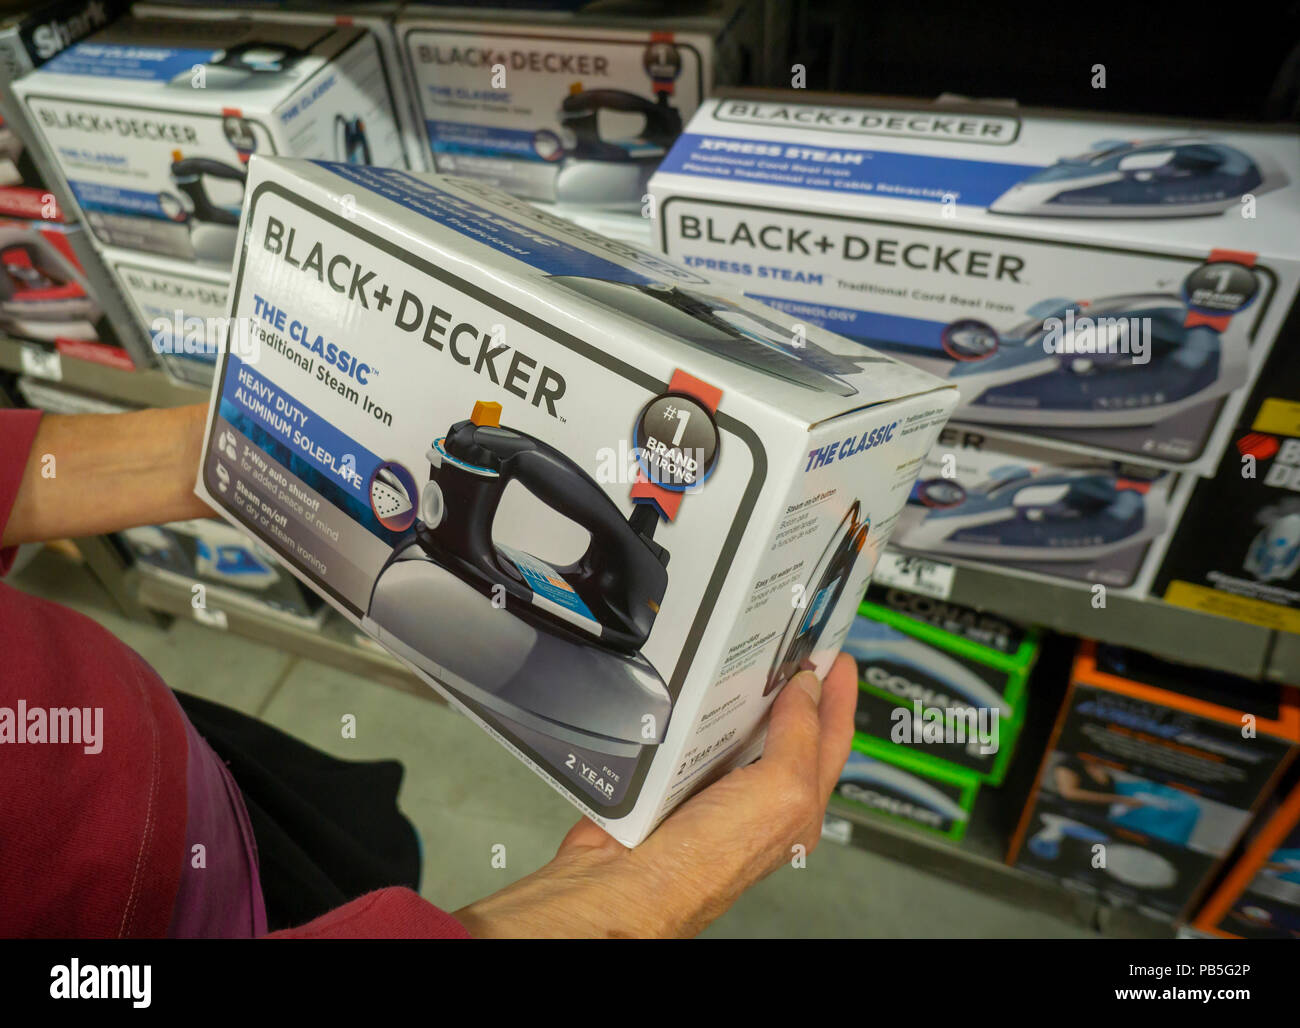 A shopper chooses a Black & Decker brand steam iron in a hardware store in  New York on Thursday, July 19, 2018. Stanley Black & Decker is scheduled to  report second-quarter earnings